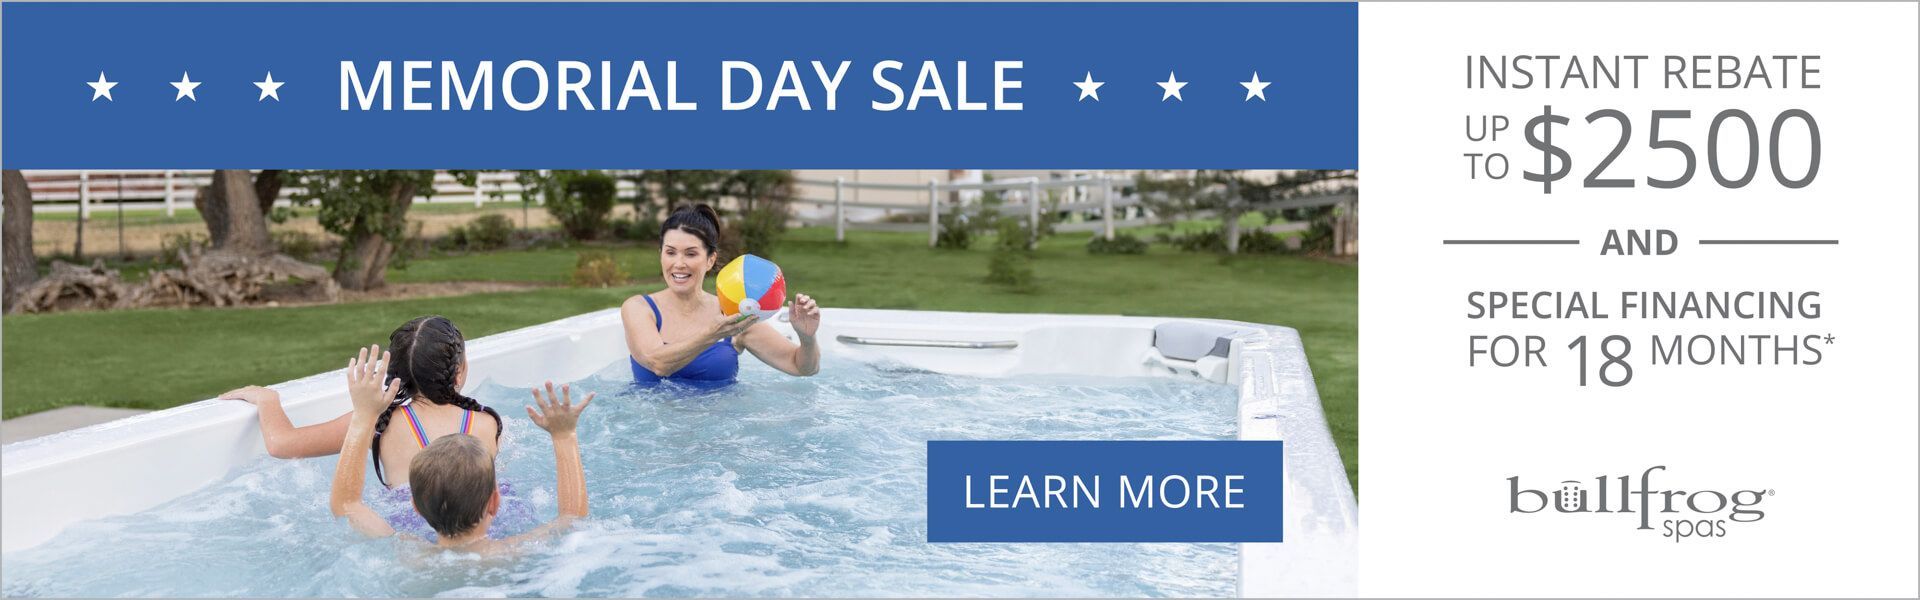 Up to $2500 Instant Rebates - Memorial Day Sale